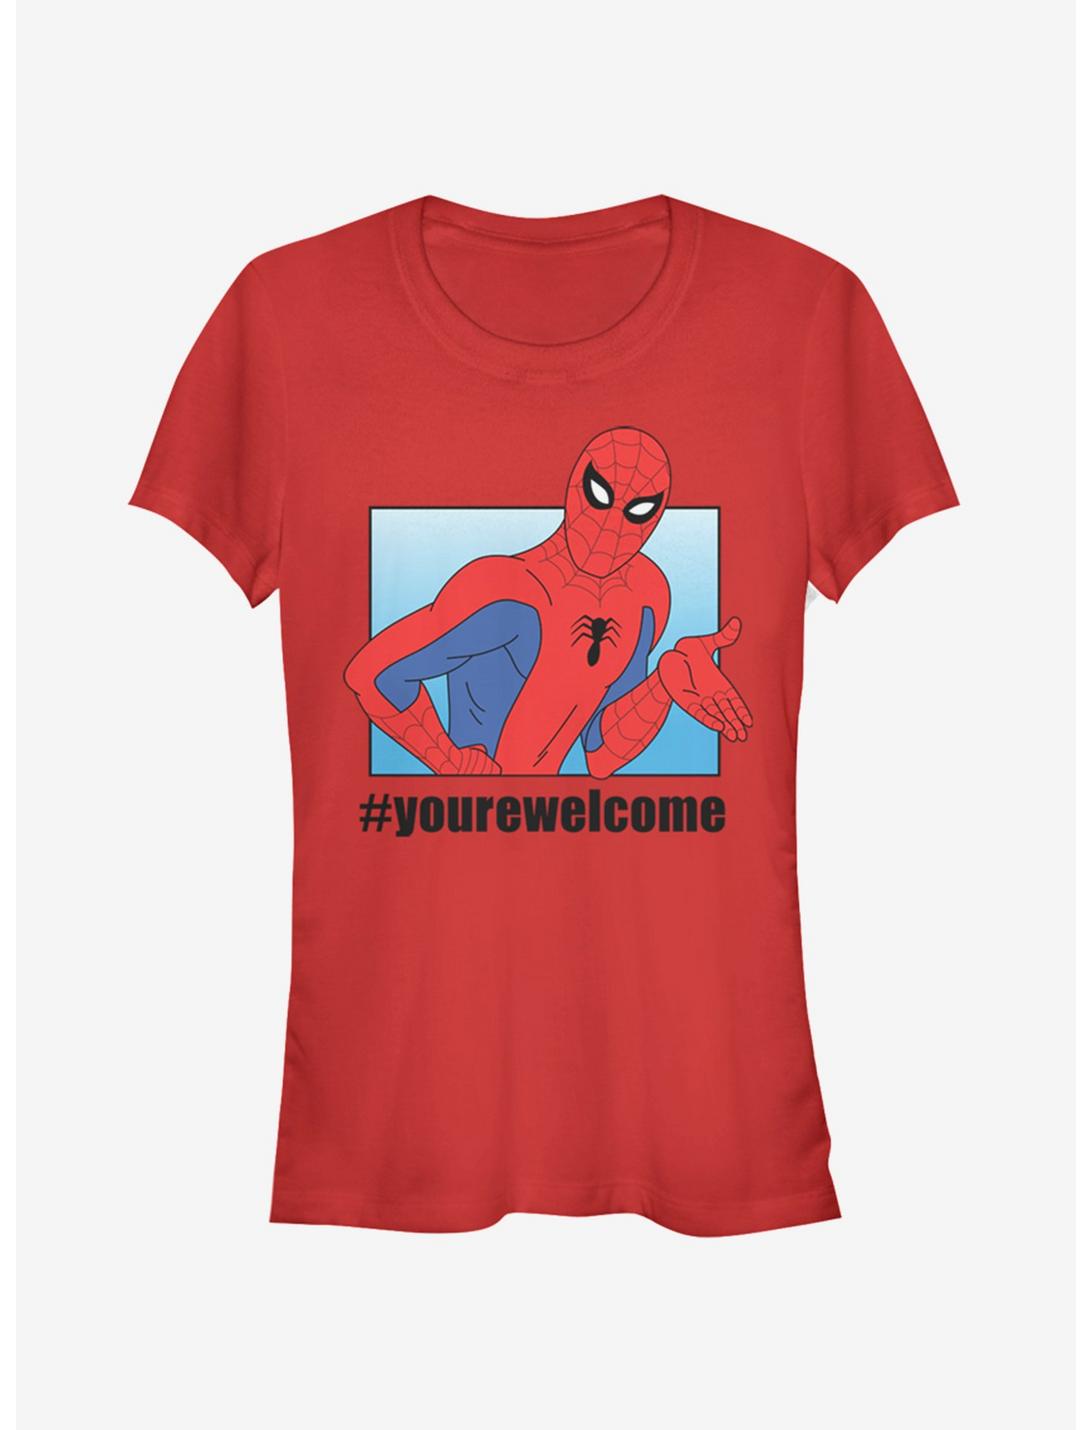 Marvel Spider-Man #yourewelcome Girls T-Shirt, RED, hi-res